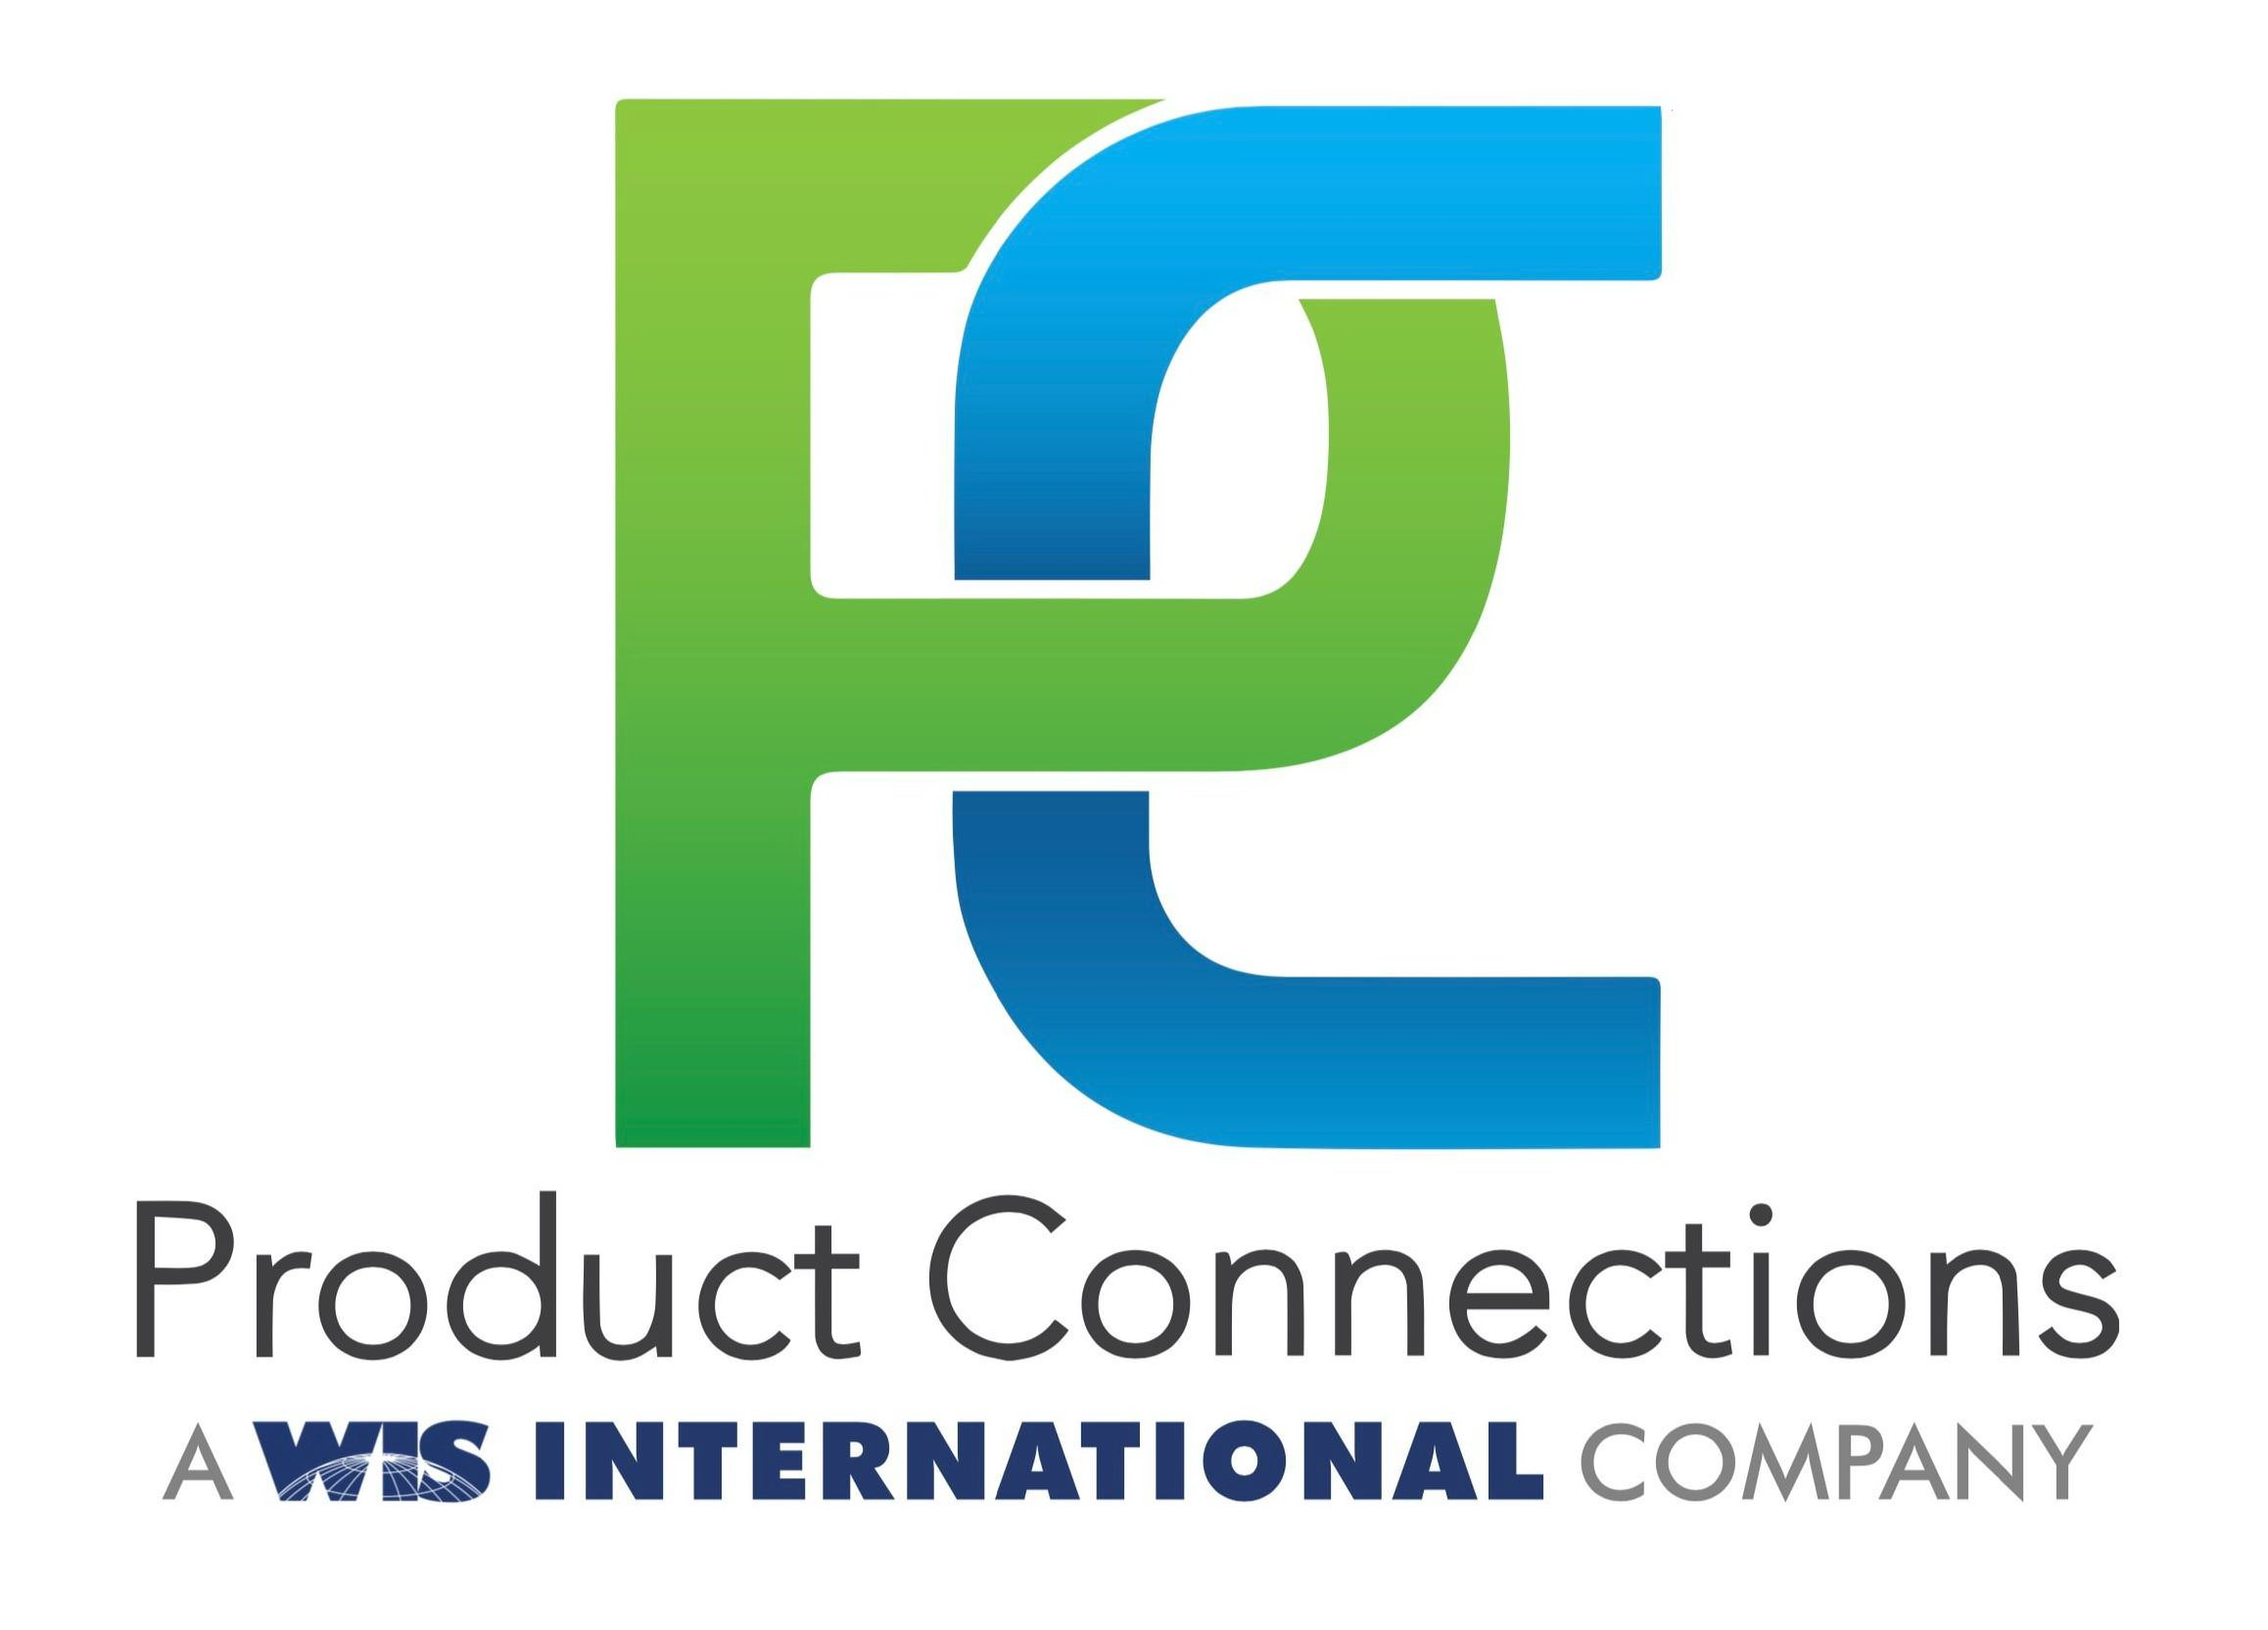  PC PRODUCT CONNECTIONS A WIS INTERNATIONAL COMPANY